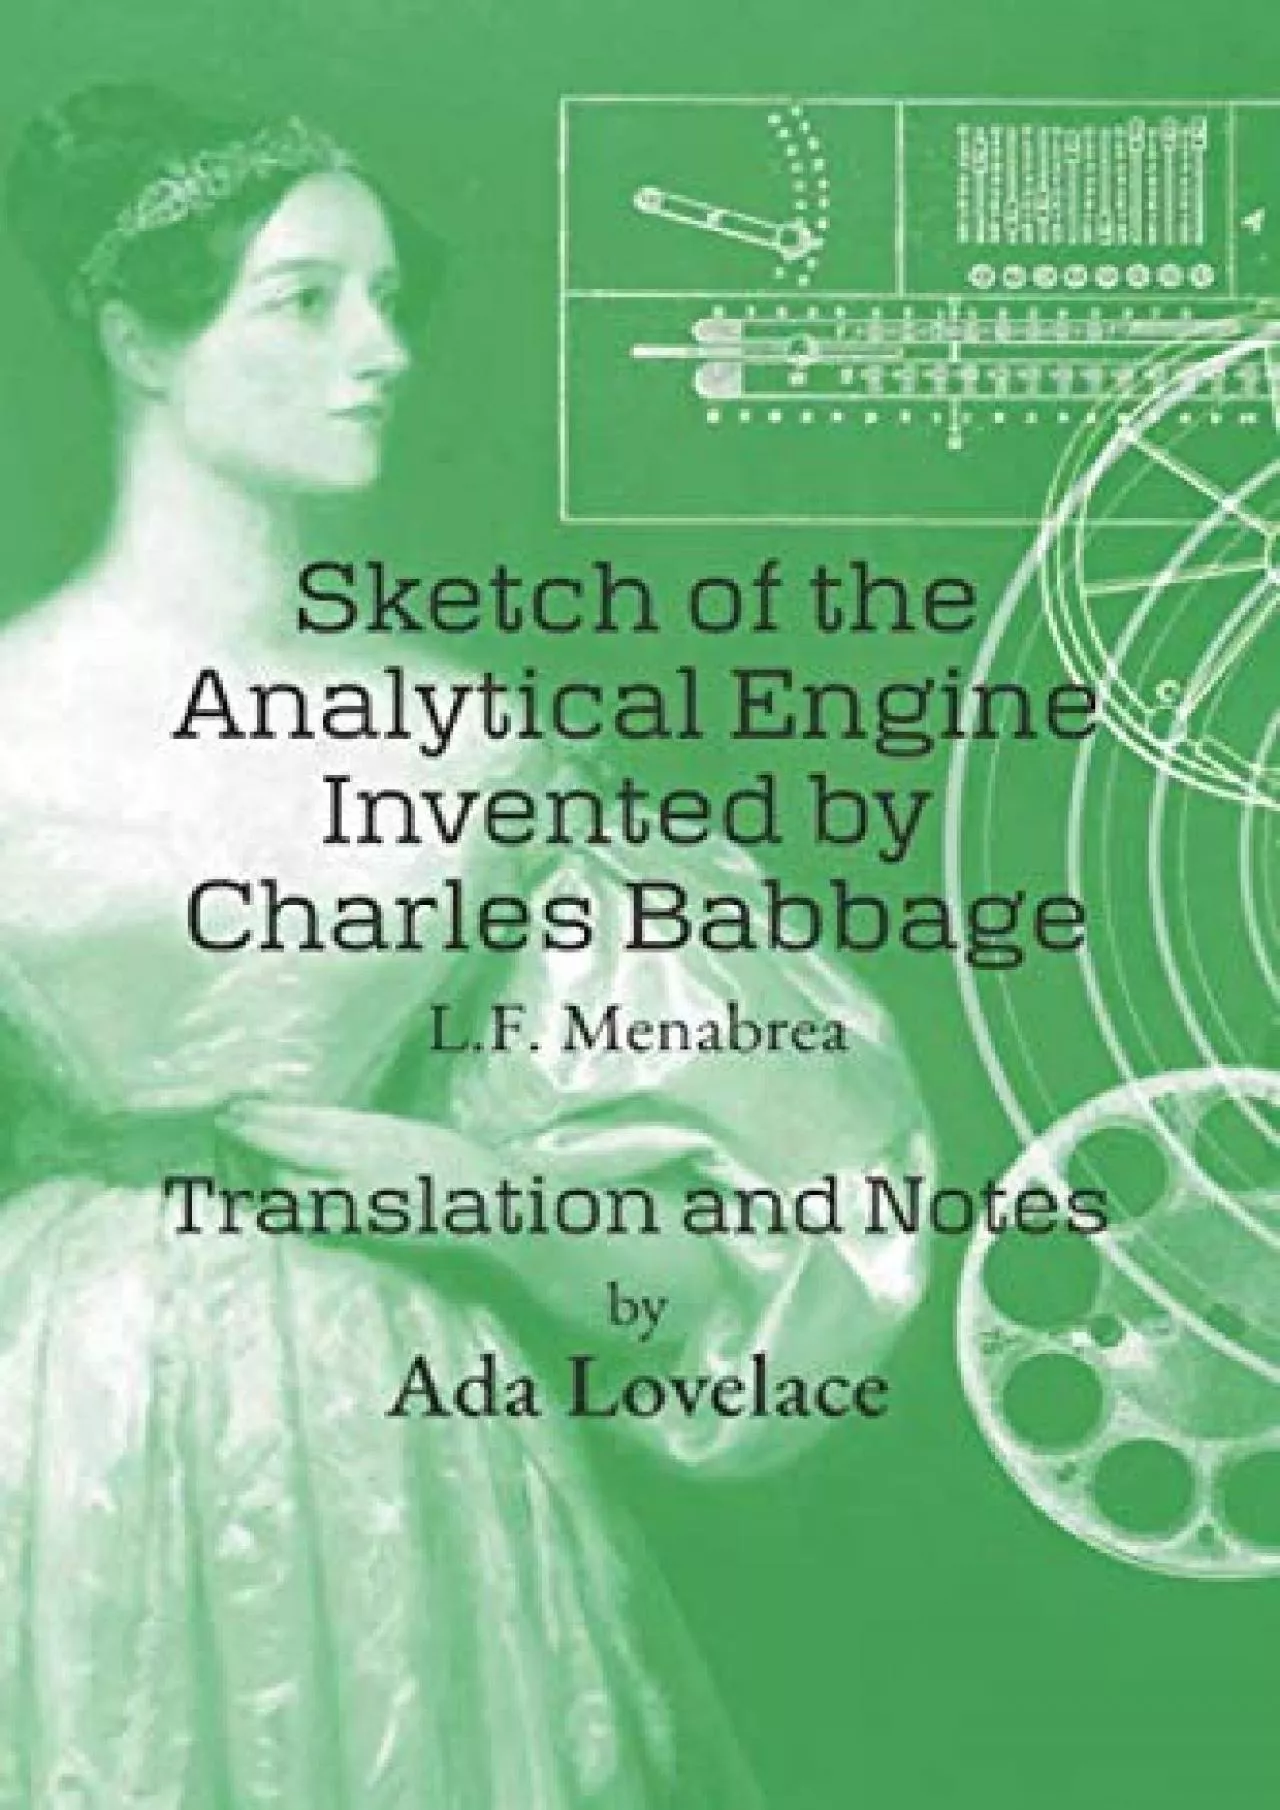 [READING BOOK]-Sketch of the Analytical Engine Invented by Charles Babbage: Translation